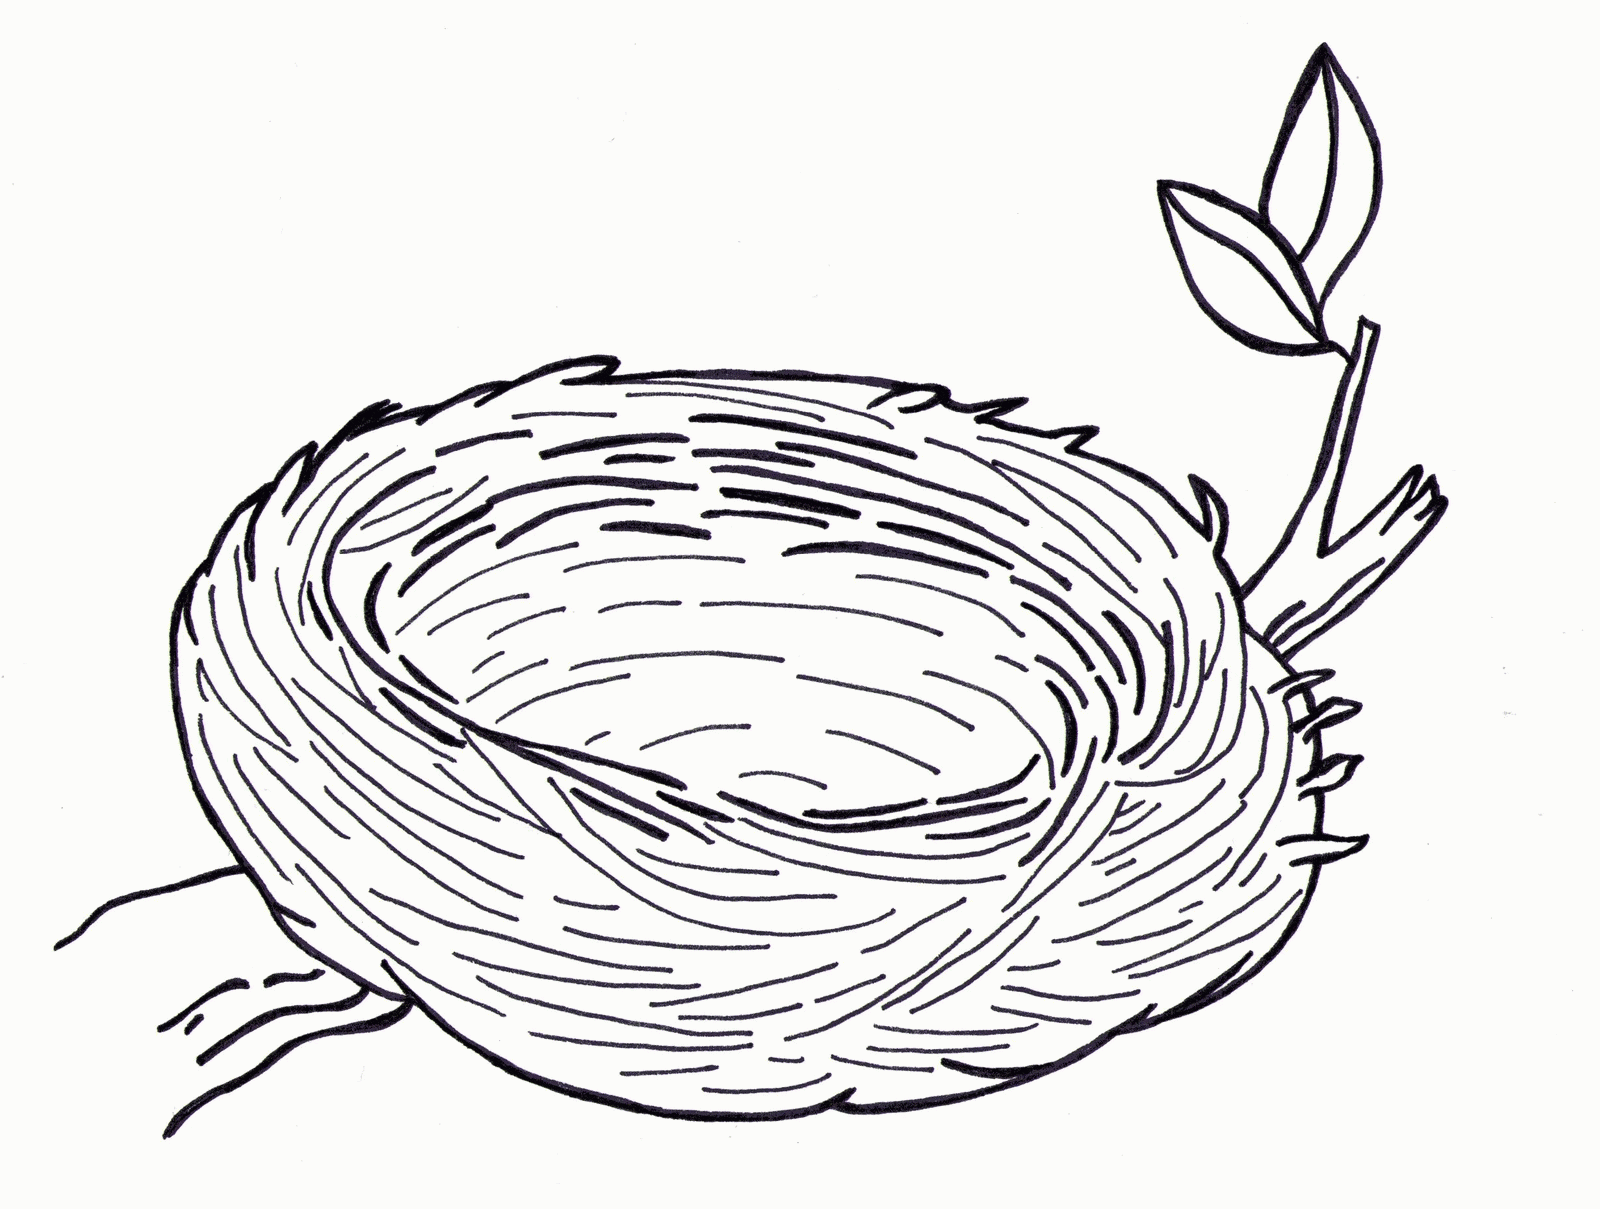 Birds nest coloring pages printable